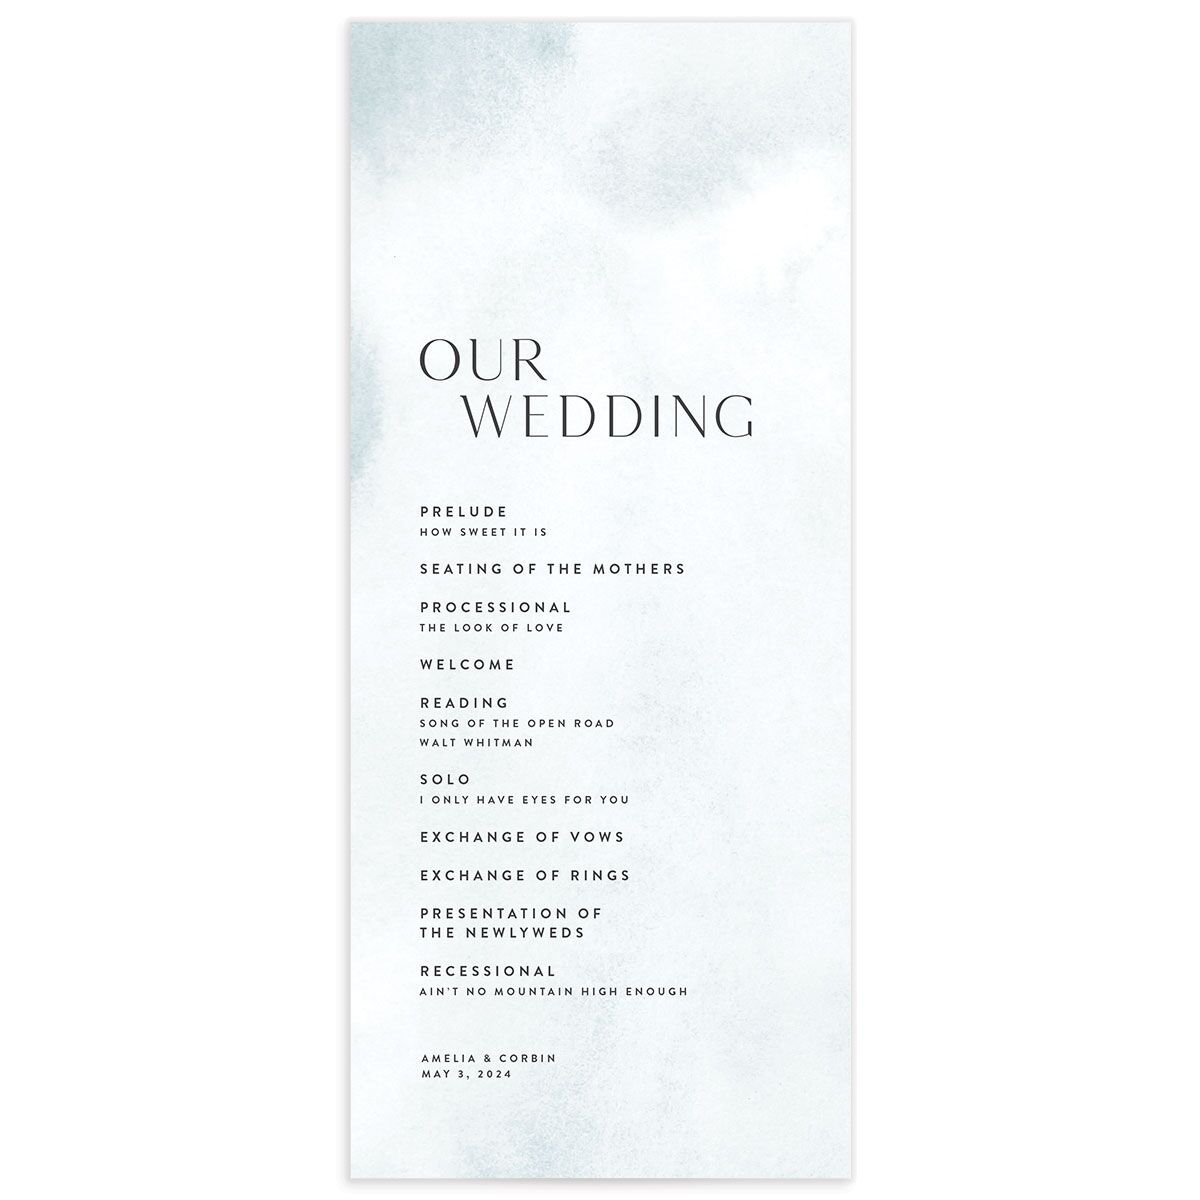 A Wedding Program from the Elegant Ethereal Collection